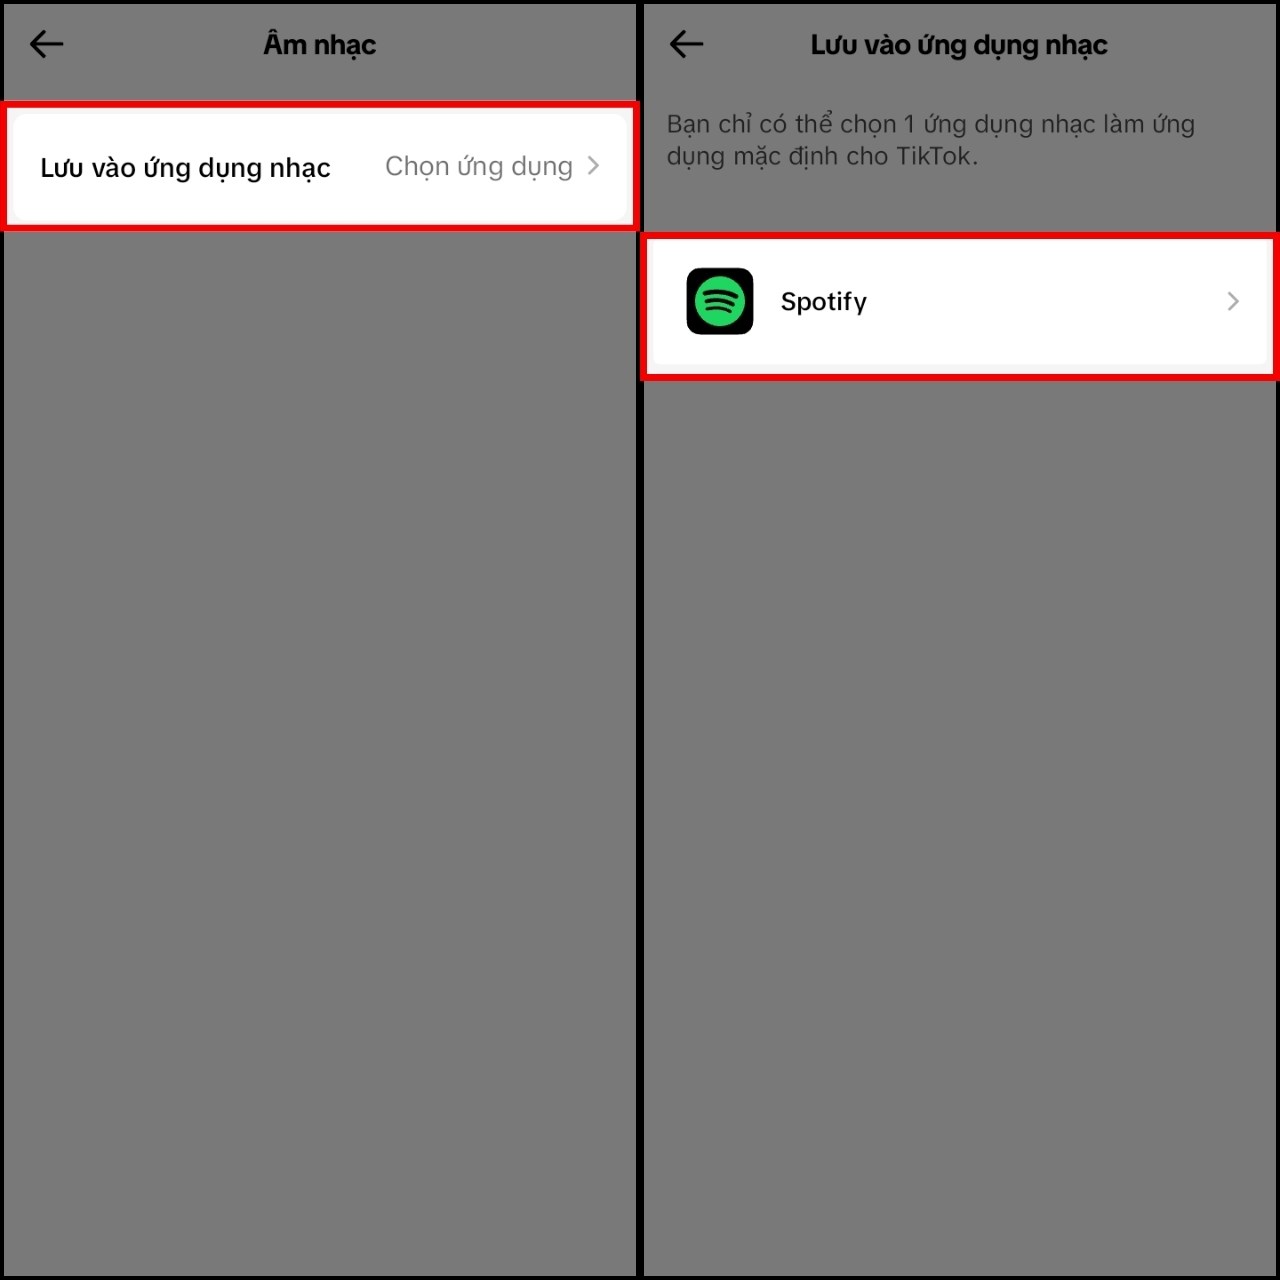 Enable a simple way to save TikTok songs to Spotify that you may not know